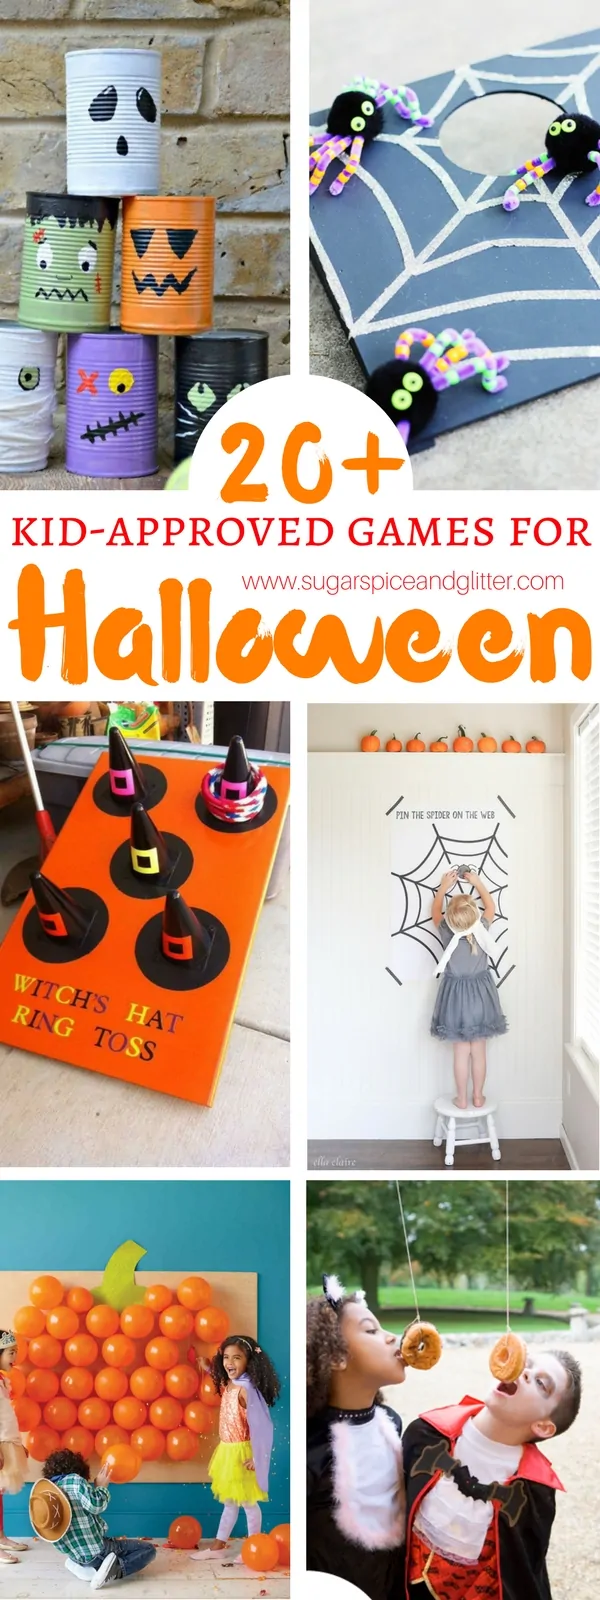 20 Kid-approved games for Halloween - all of your Halloween party planning done for you. These games can even be made by kids and would work great indoors or outdoors.